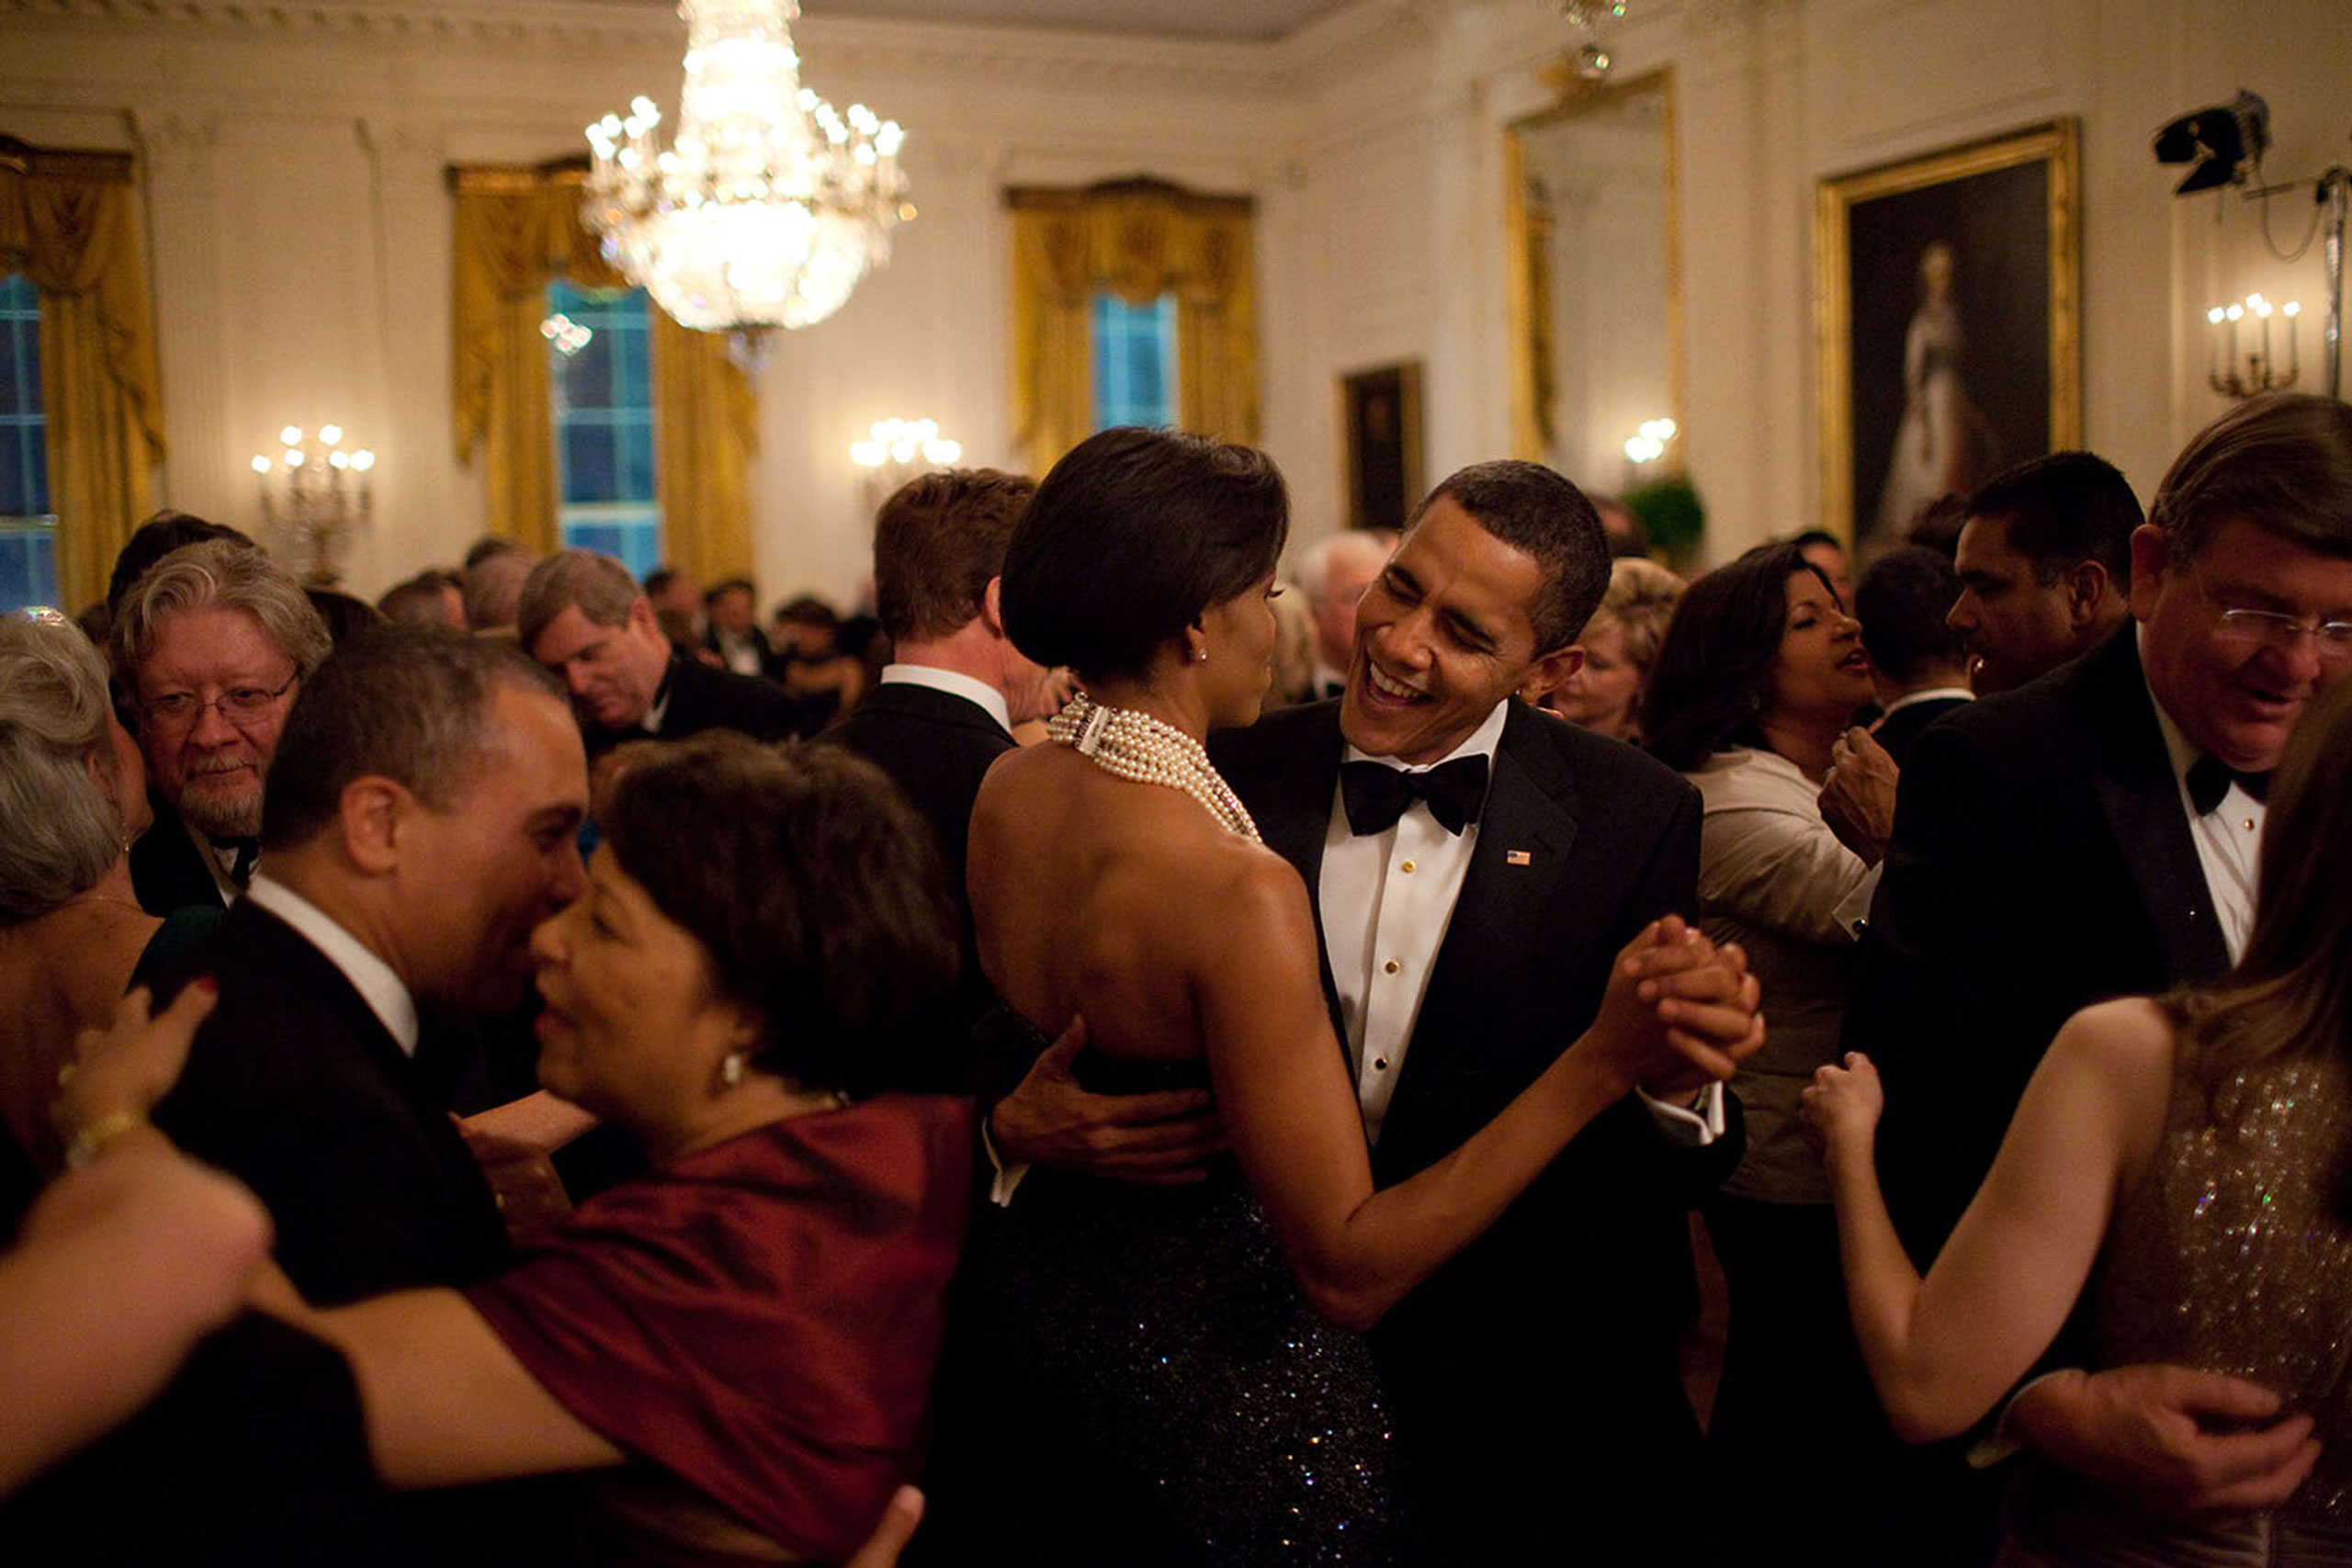 The President dances with his wife while singing along with the band Earth, Wind &amp; Fire during the Governors Ball, his first formal function at the White House, on Feb. 22, 2009